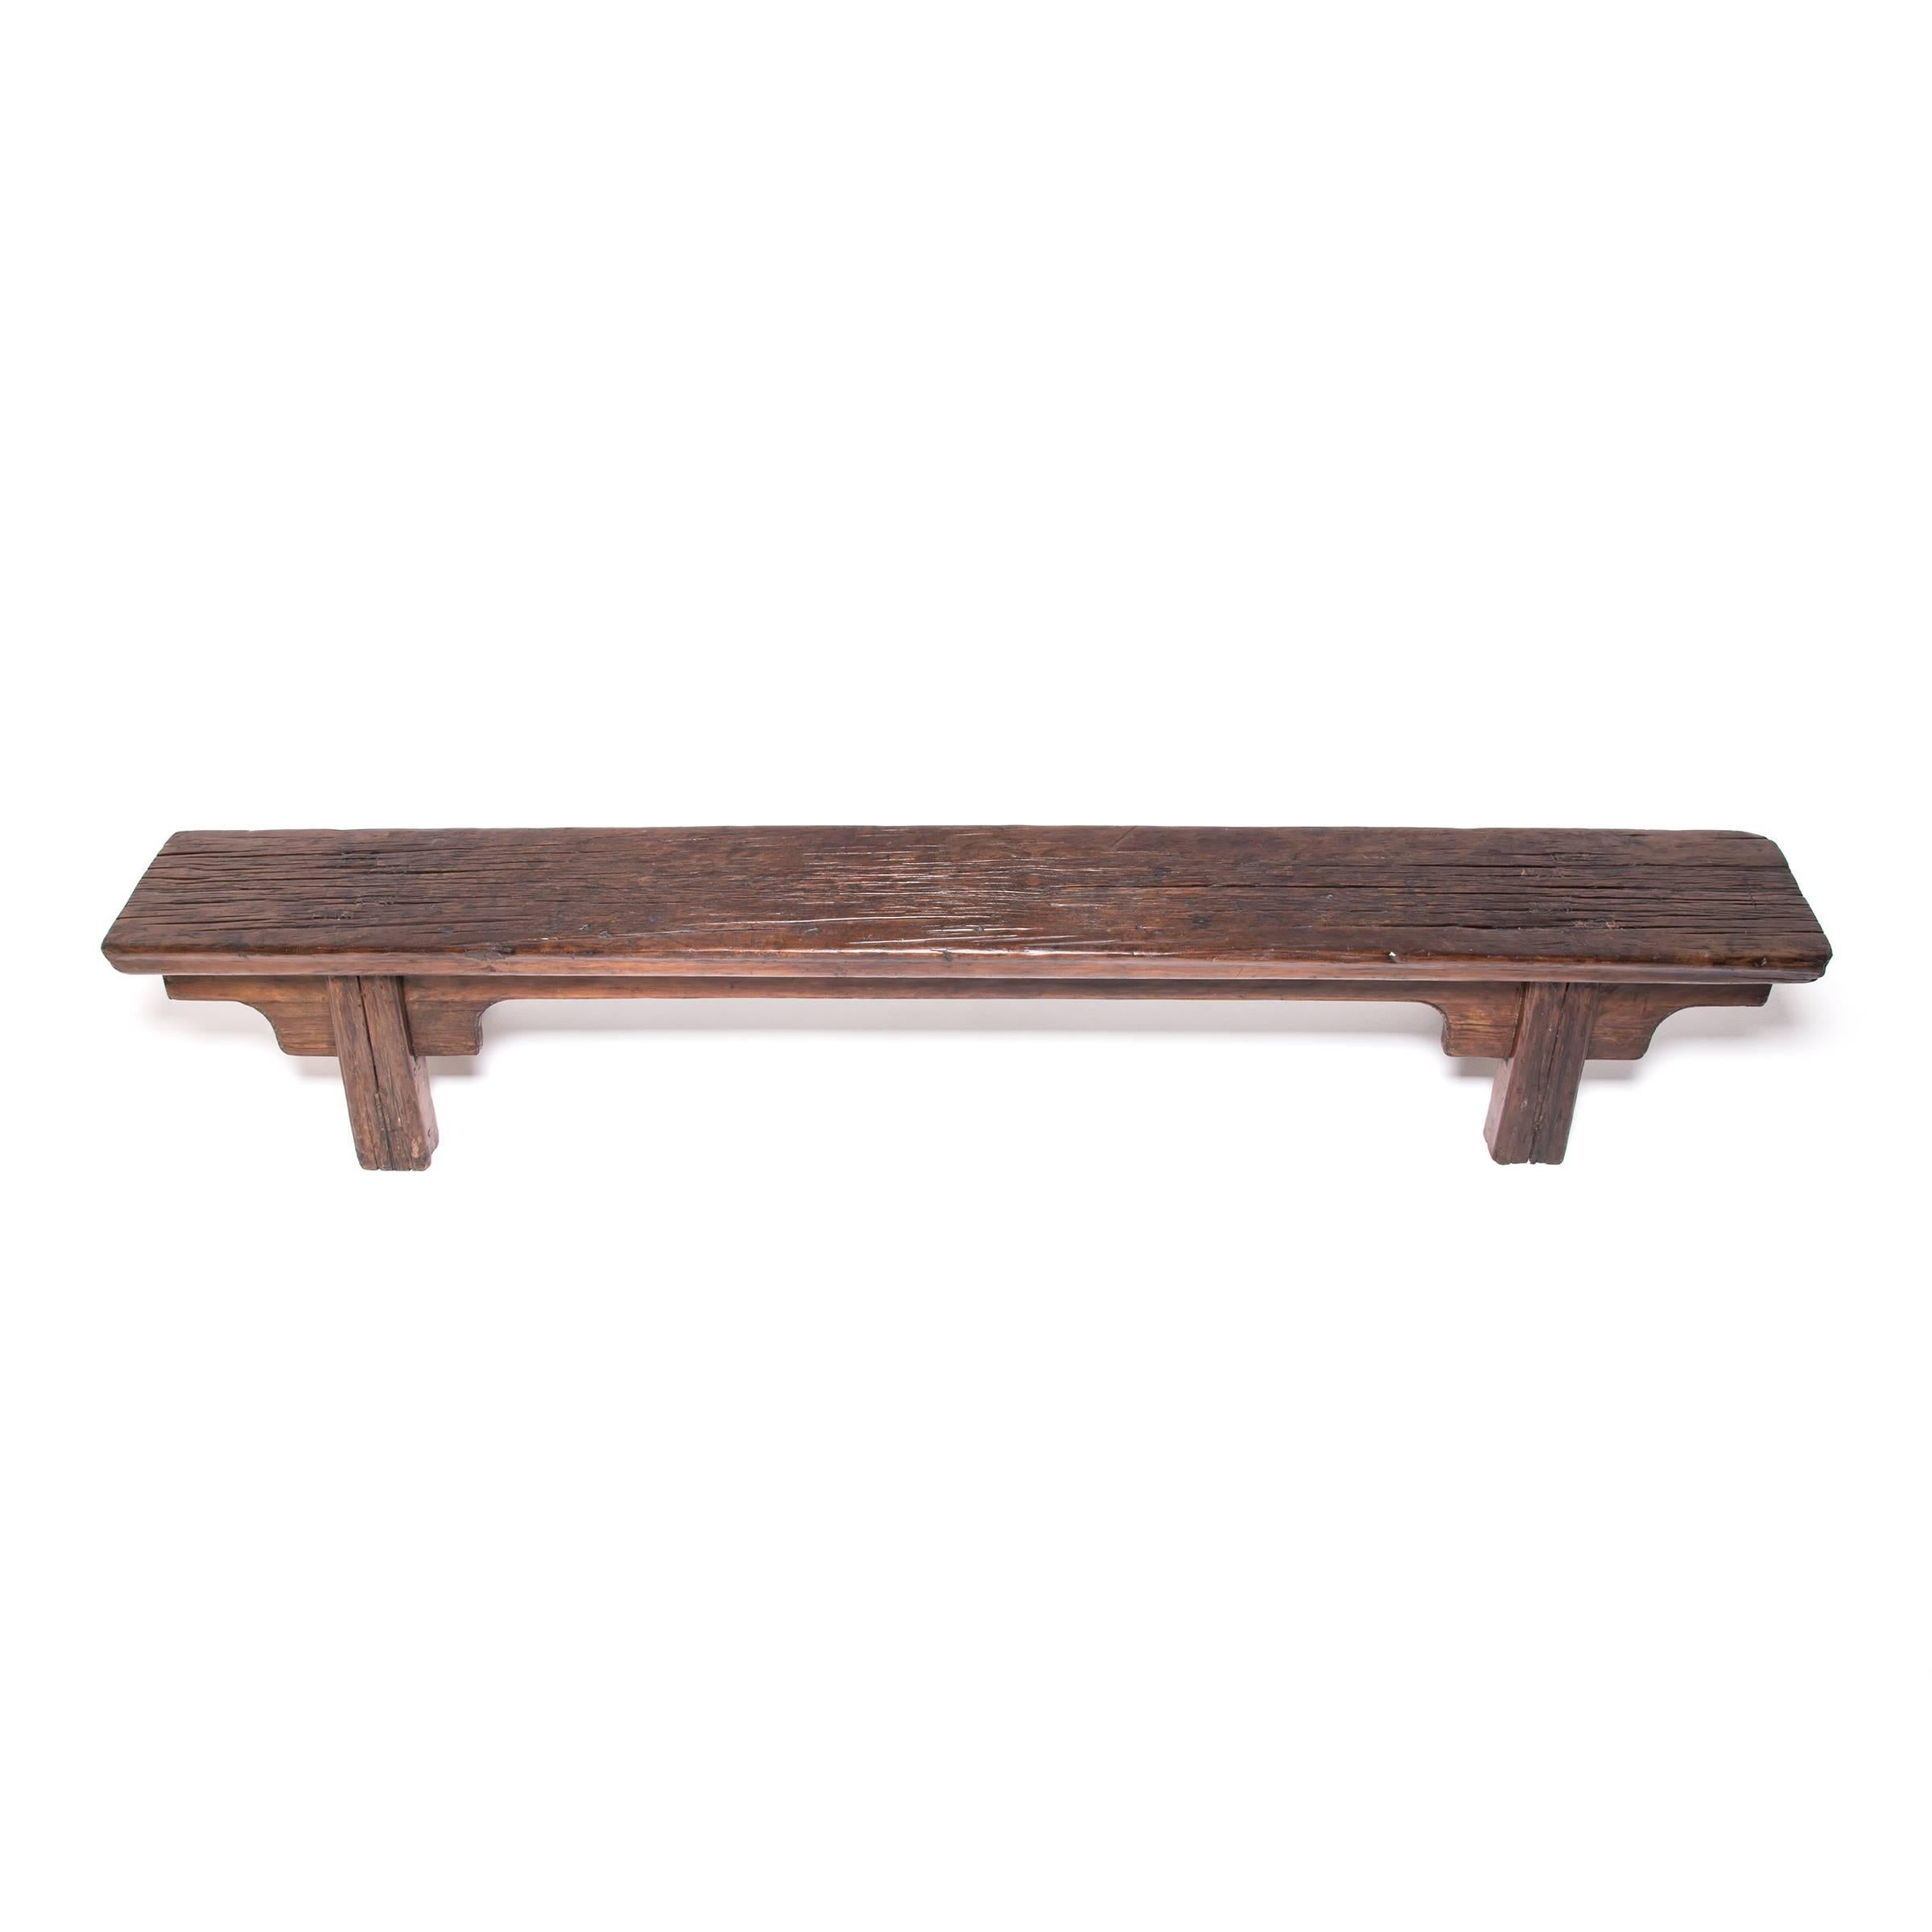 Provincial Chinese Elmwood Bench, c. 1850 In Good Condition For Sale In Chicago, IL